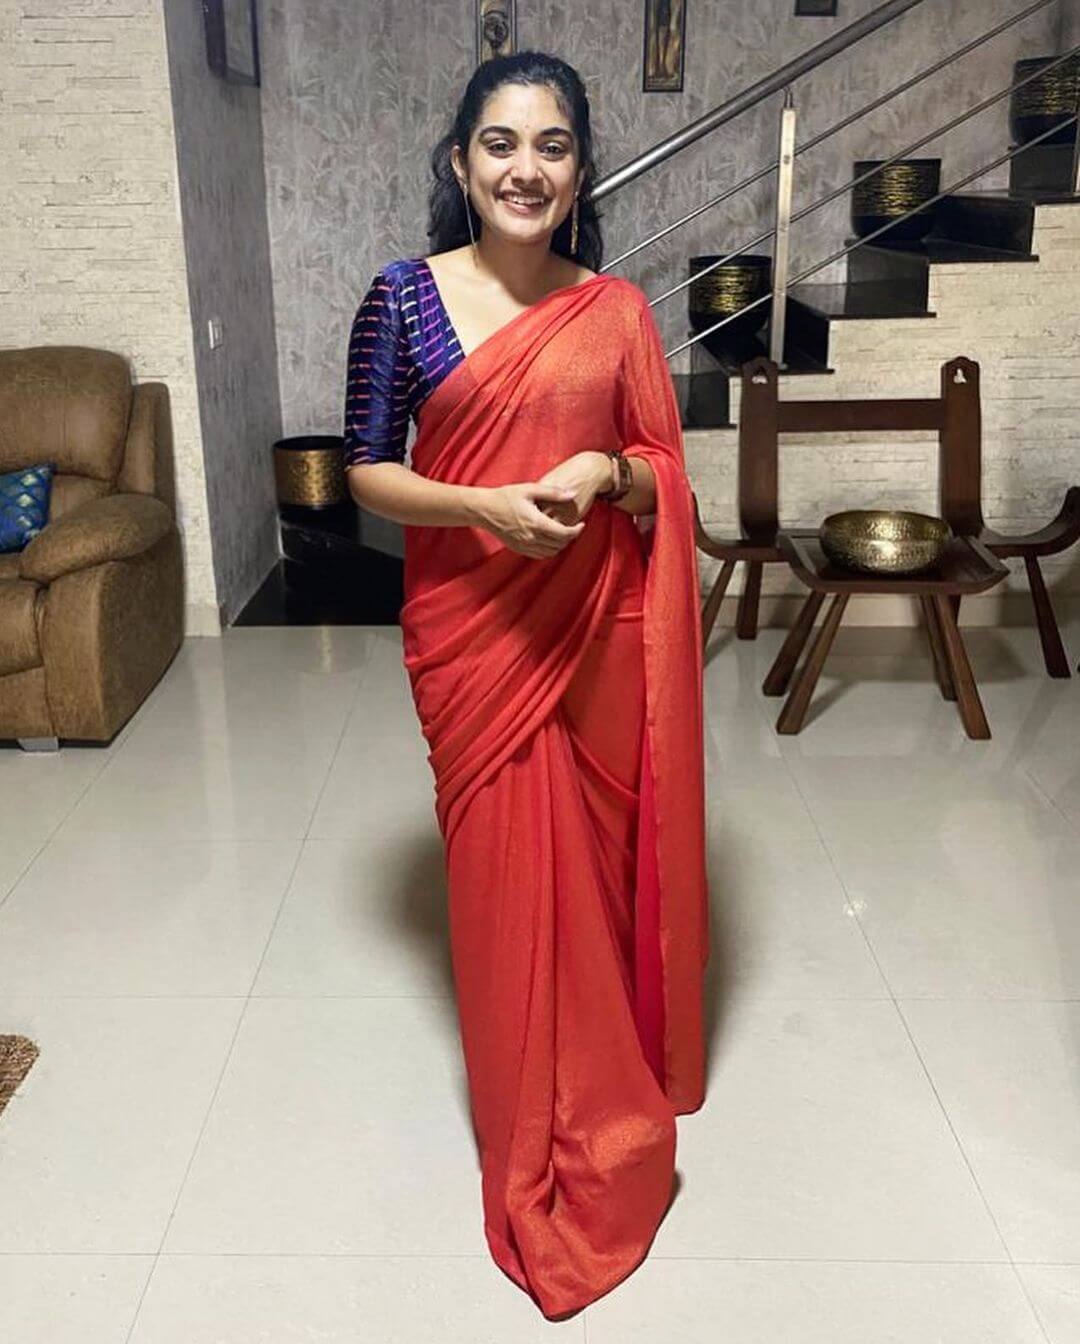 Nivetha Thomas Look Gorgeous In Red Saree With Blue Contrasting Blouse